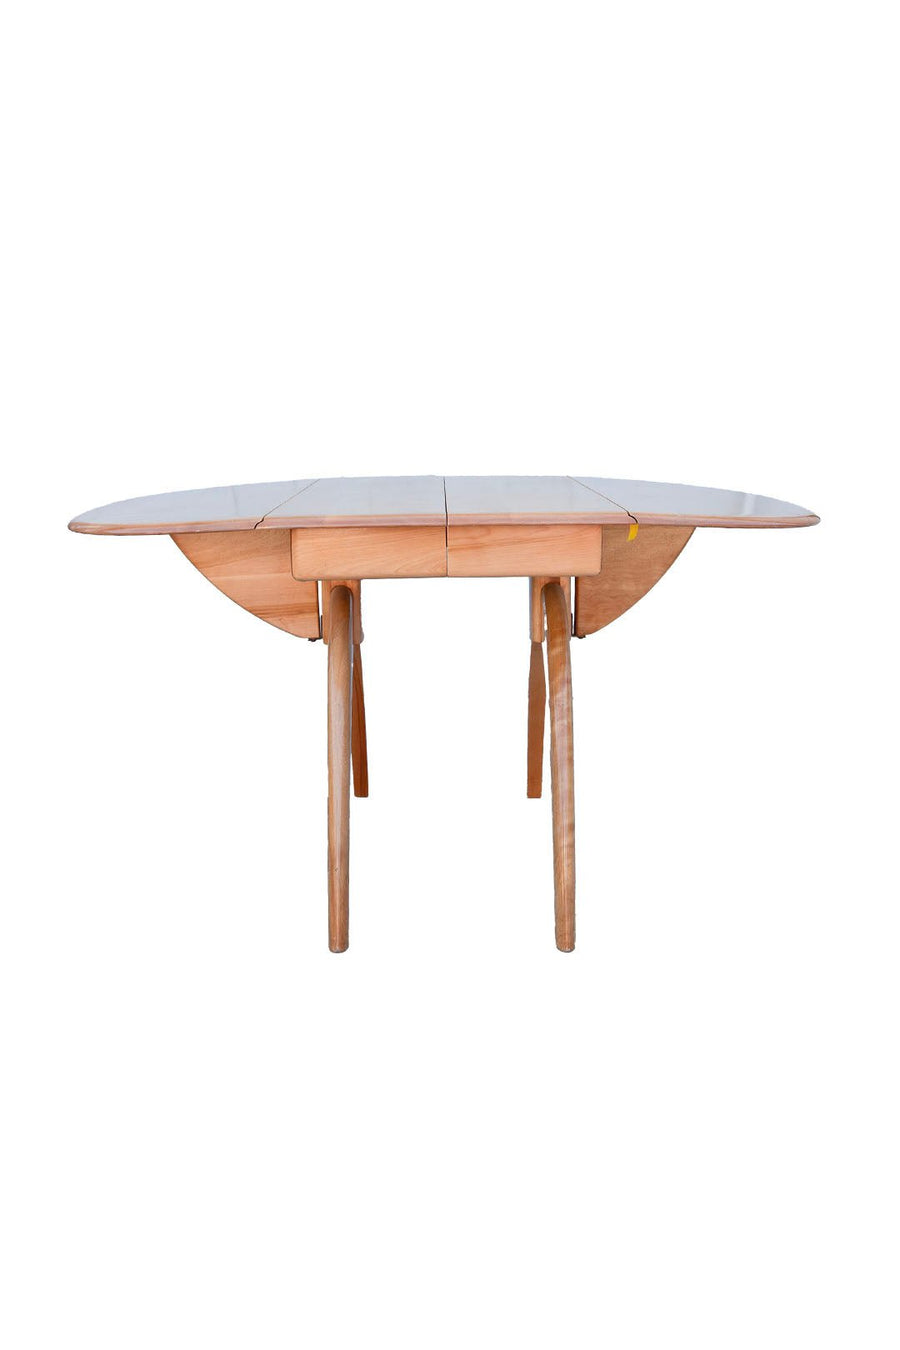 Mid-Century Modern Heywood Wakefield Dining Table (2 Leaf) With 6 